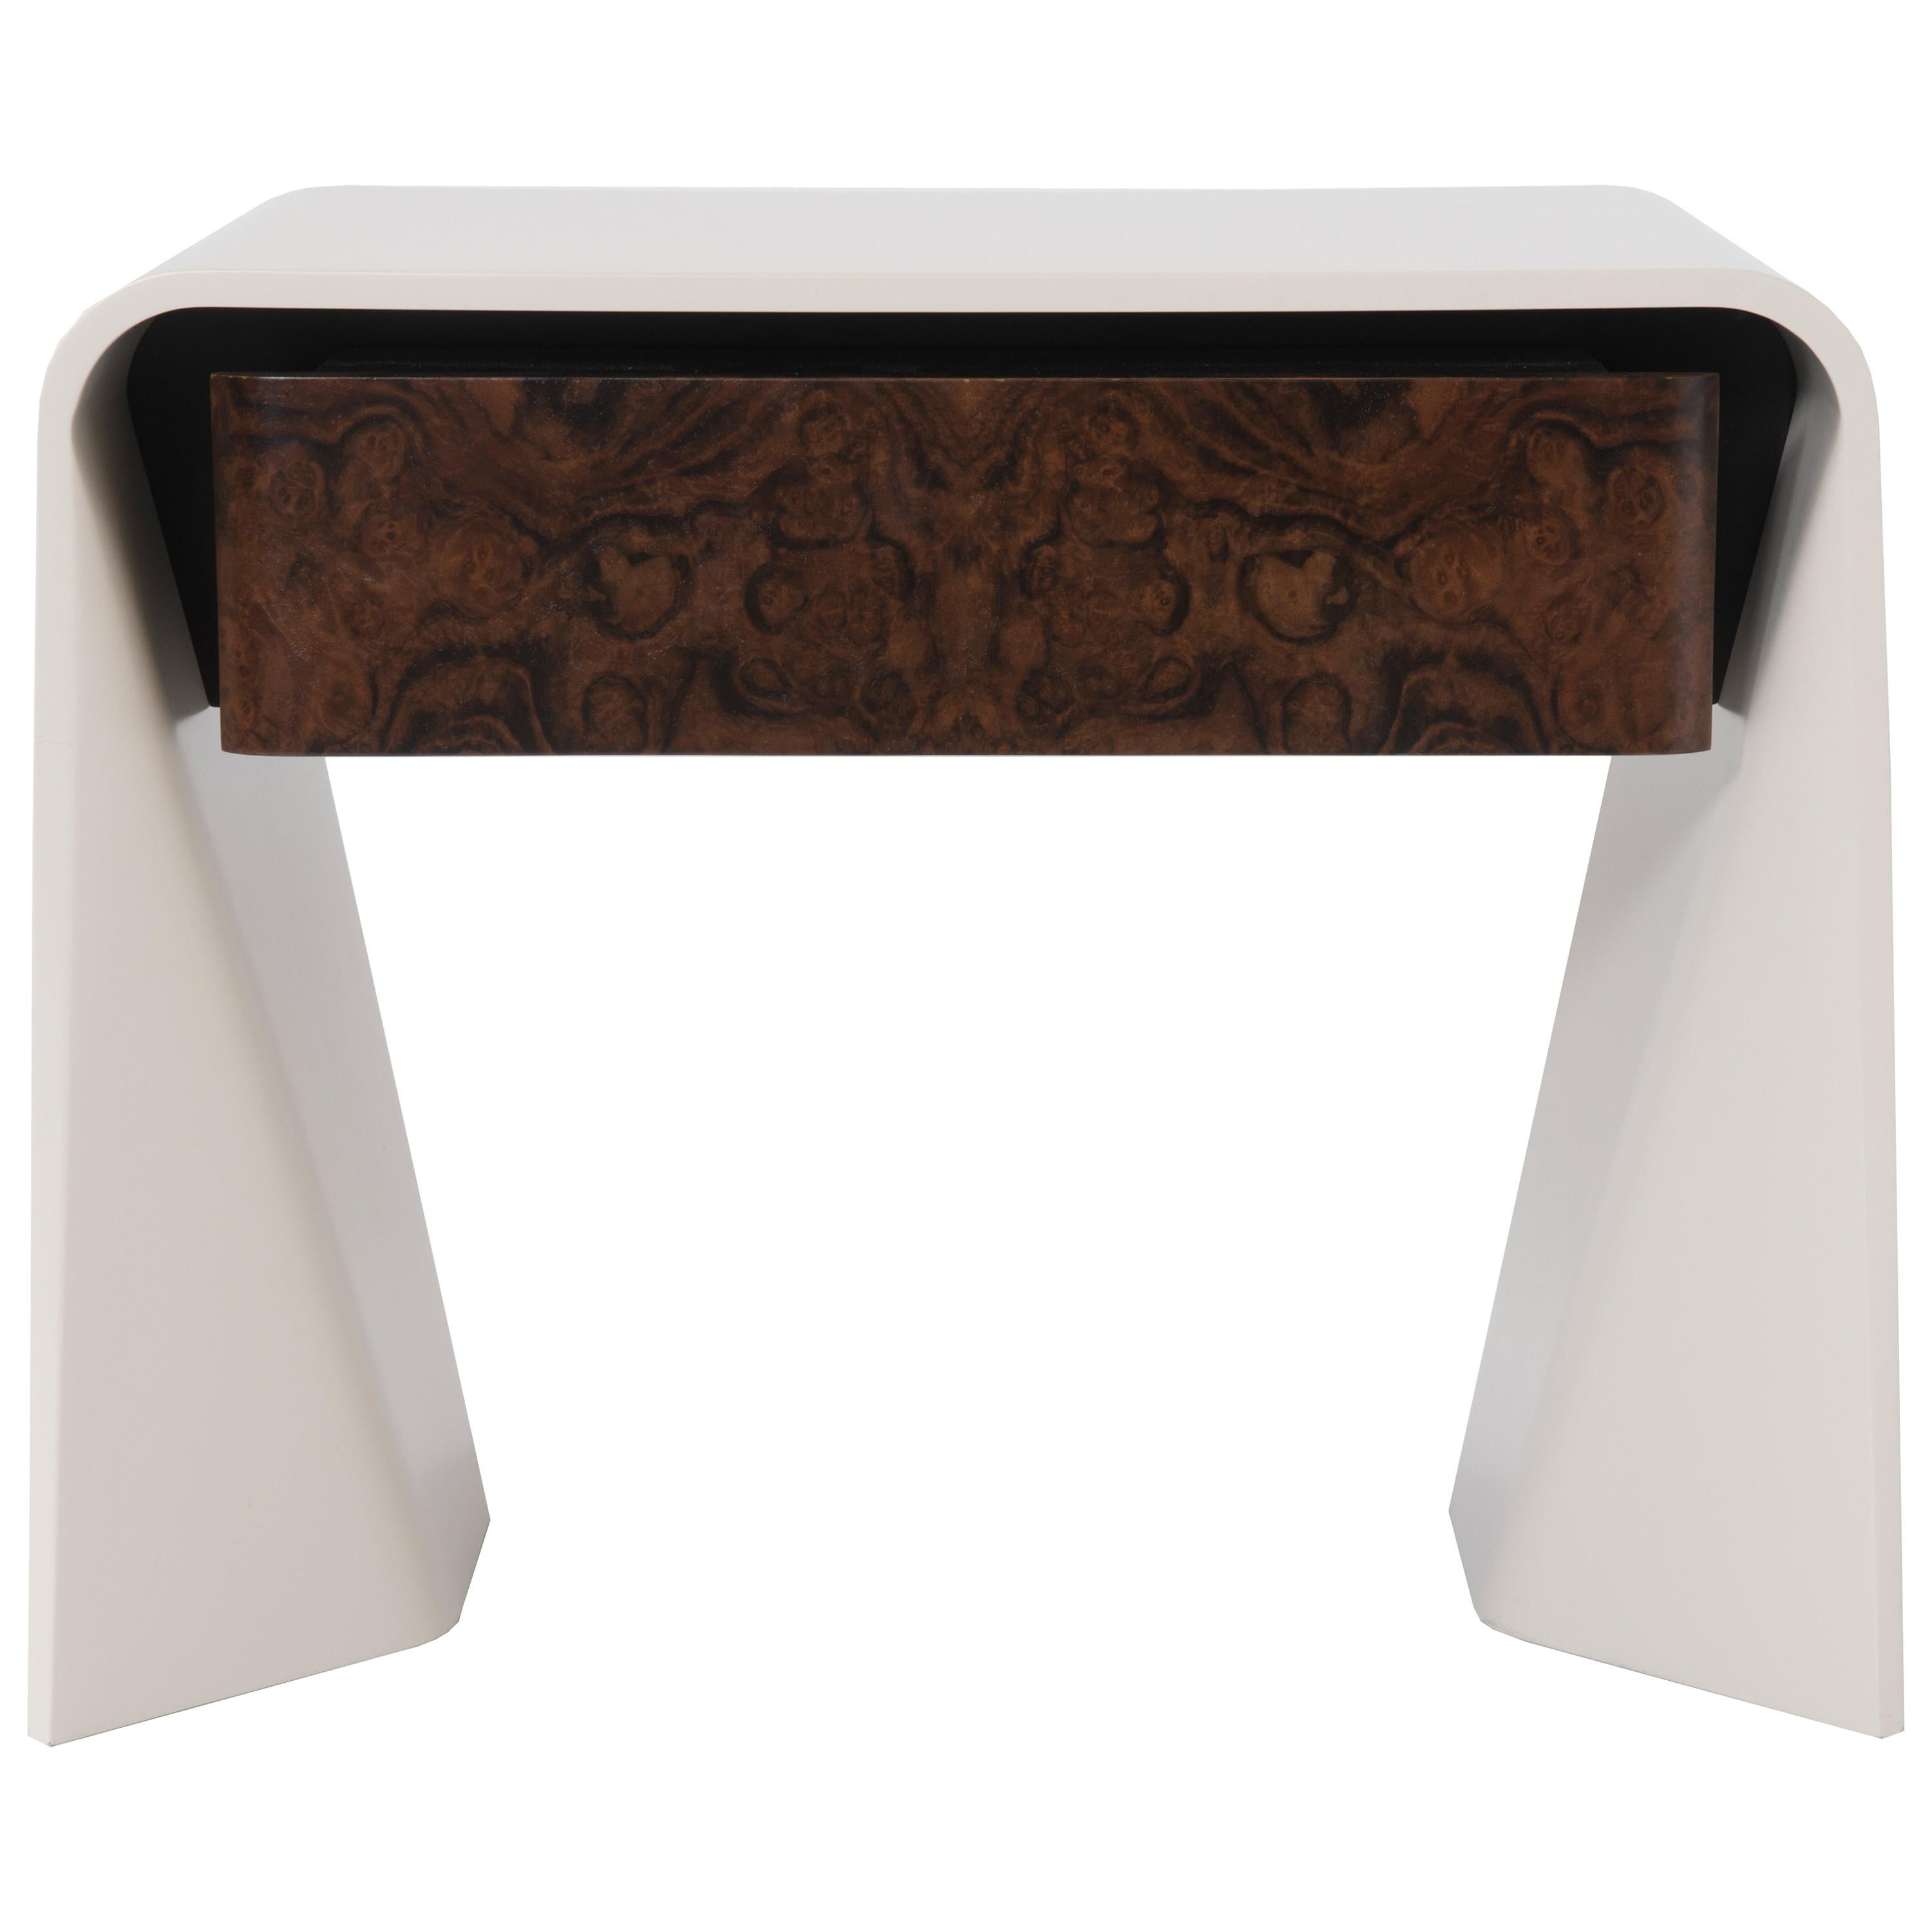 Donghia Tendu Lacquered Wood End Table in Parchment im Angebot